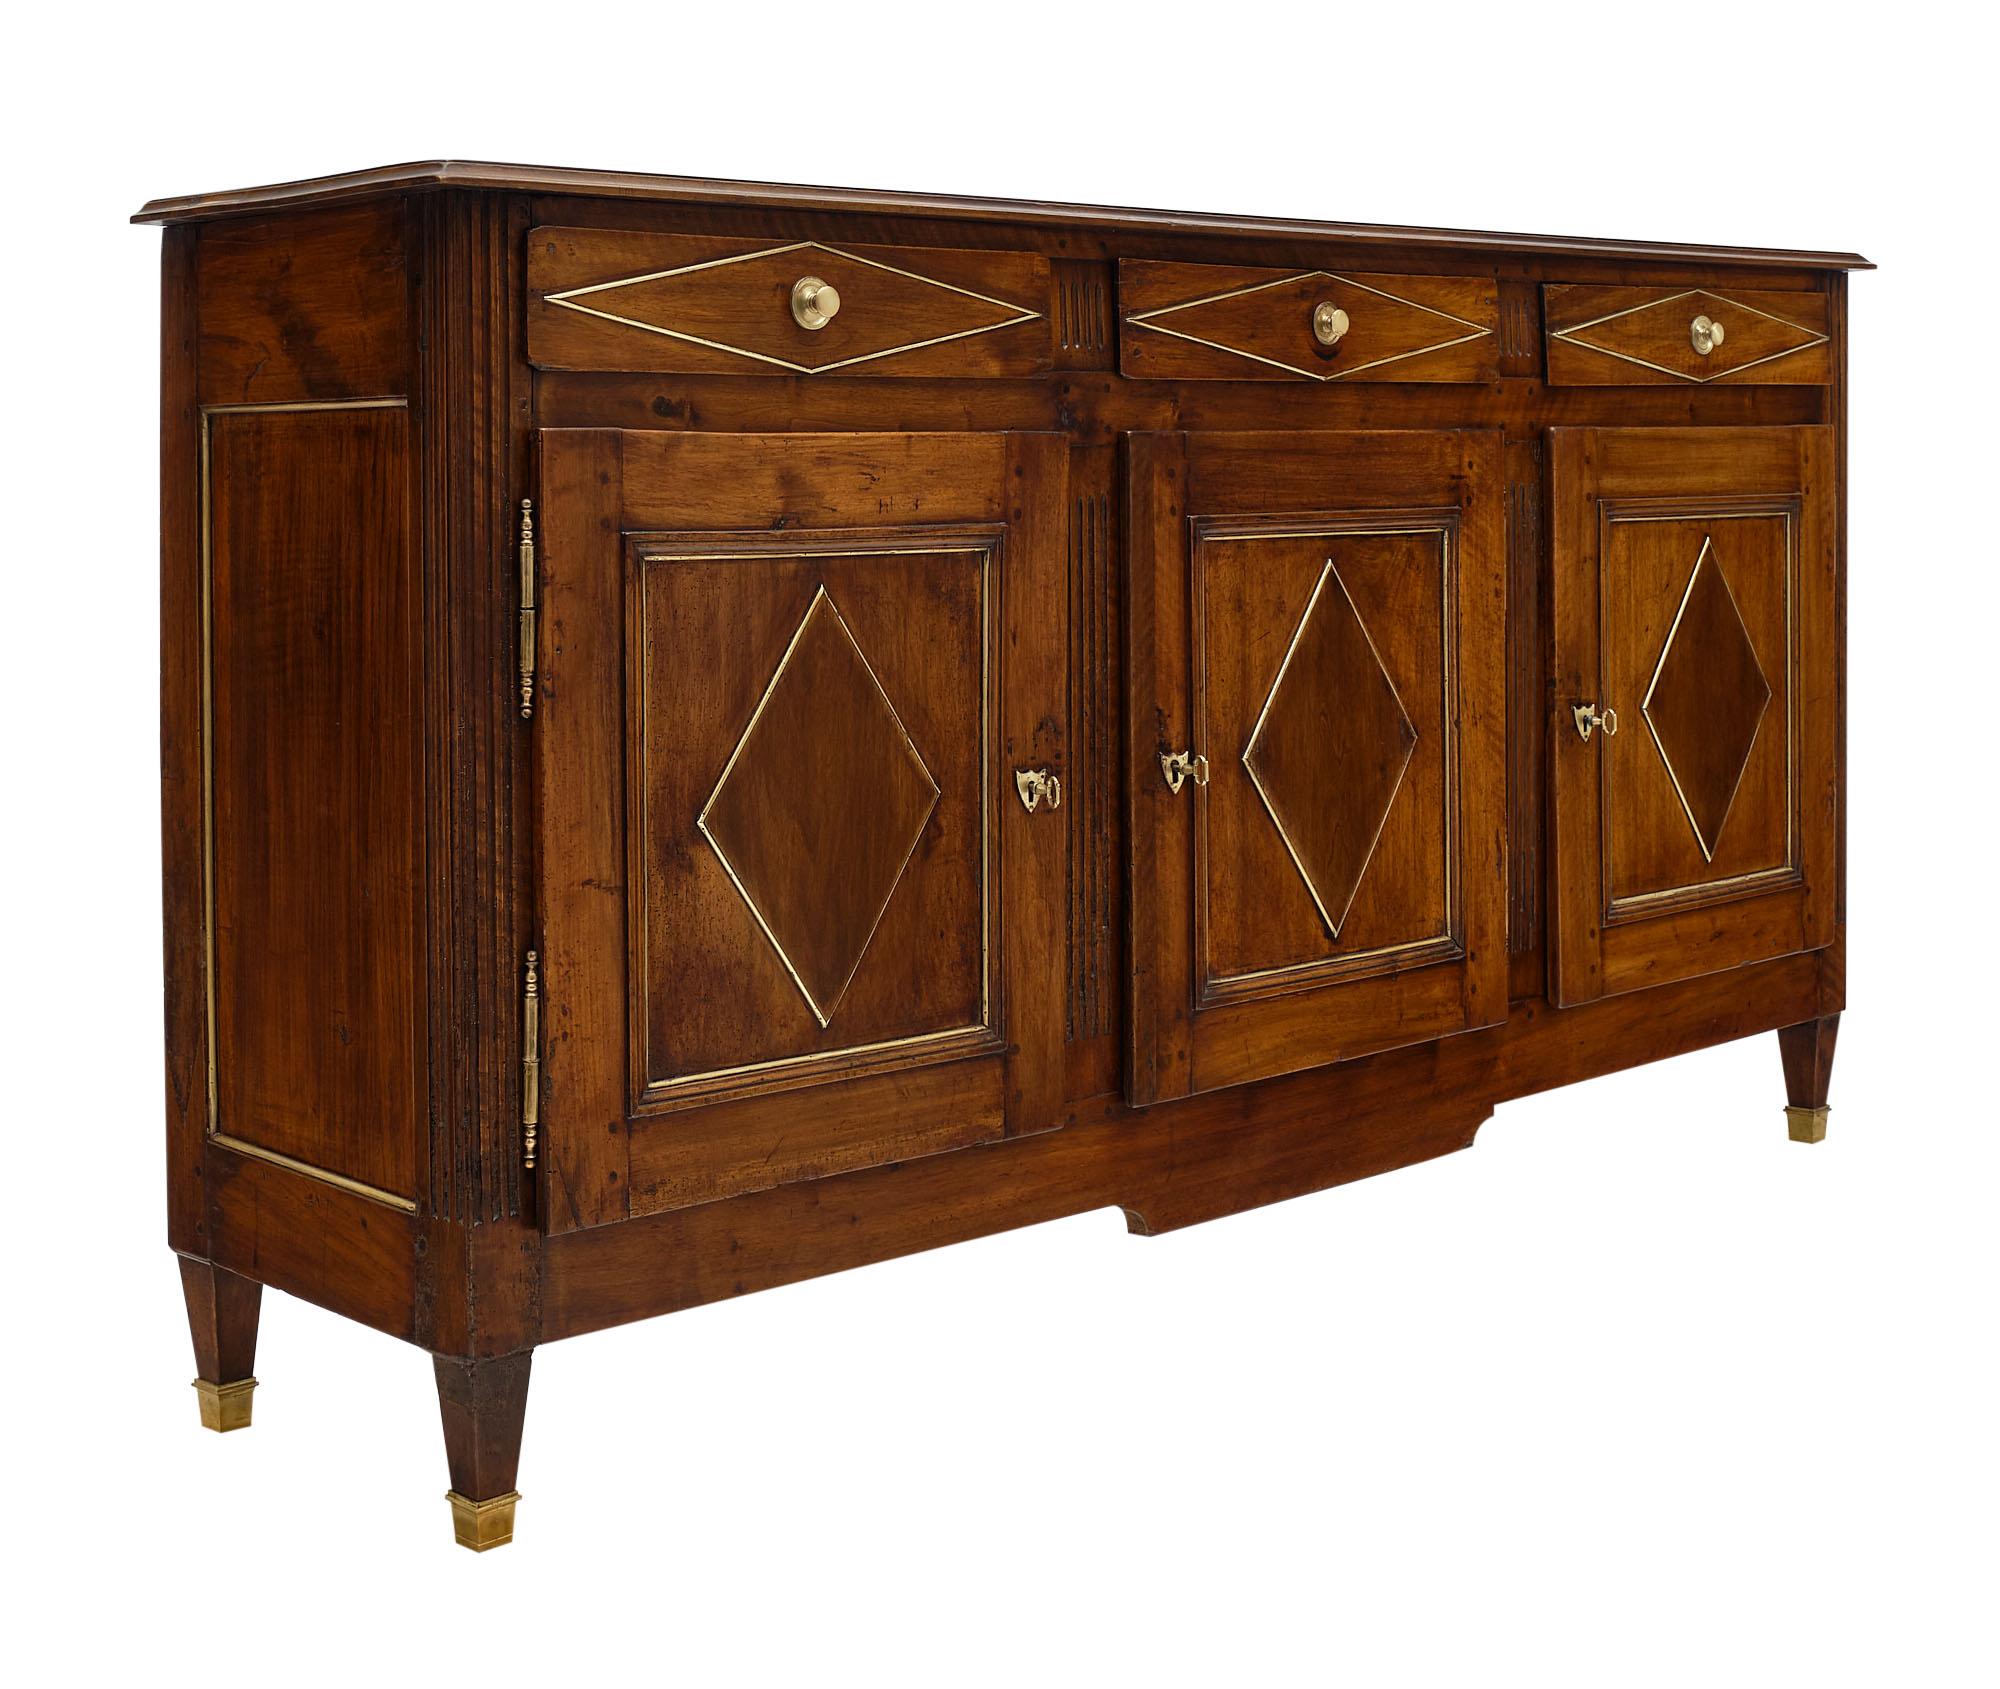 Buffet from the Directoire period in France. This piece is made of solid walnut from the Rhone Valley. There are three dovetailed drawers above three doors adorned with a hand-carved motif in high relief and gilt brass trims throughout. Square